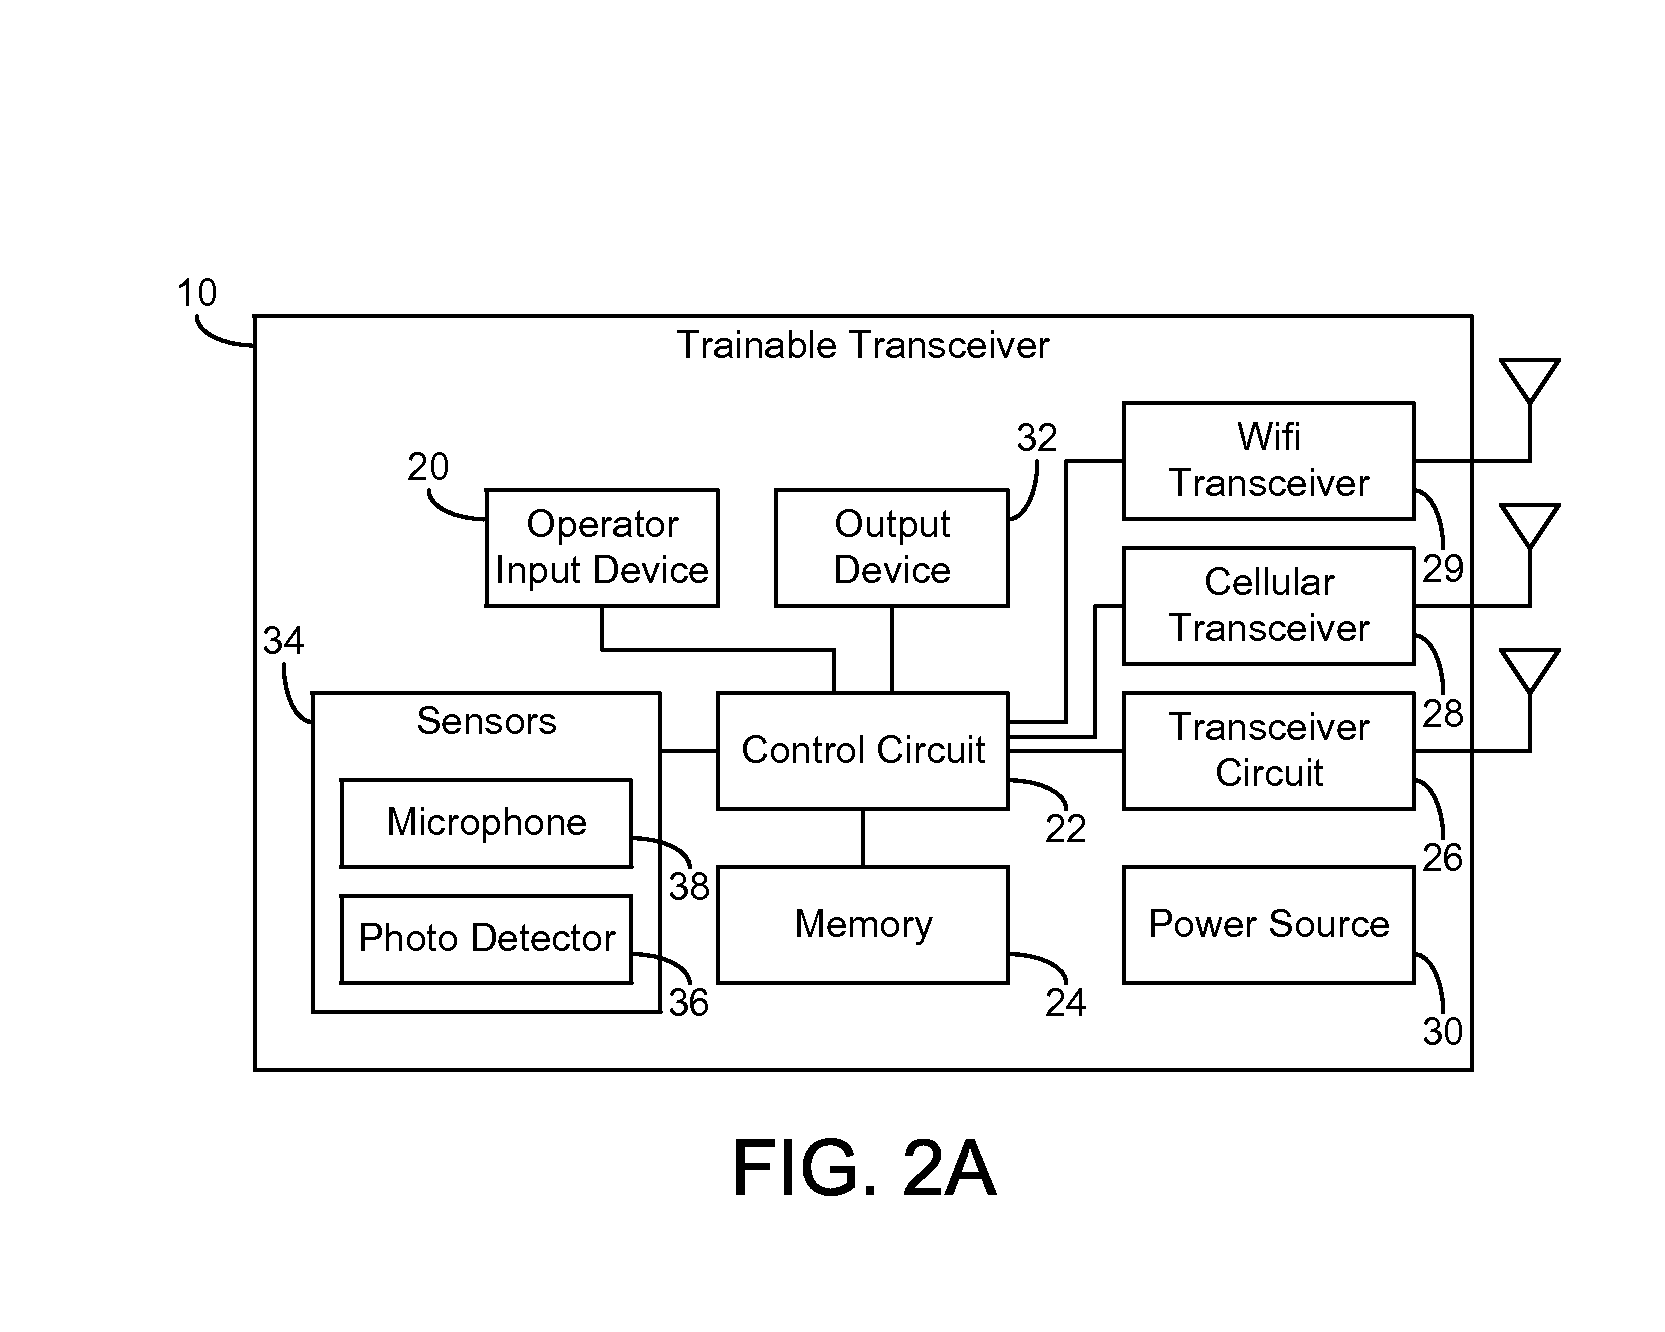 Trainable transceiver and cloud computing system architecture systems and methods